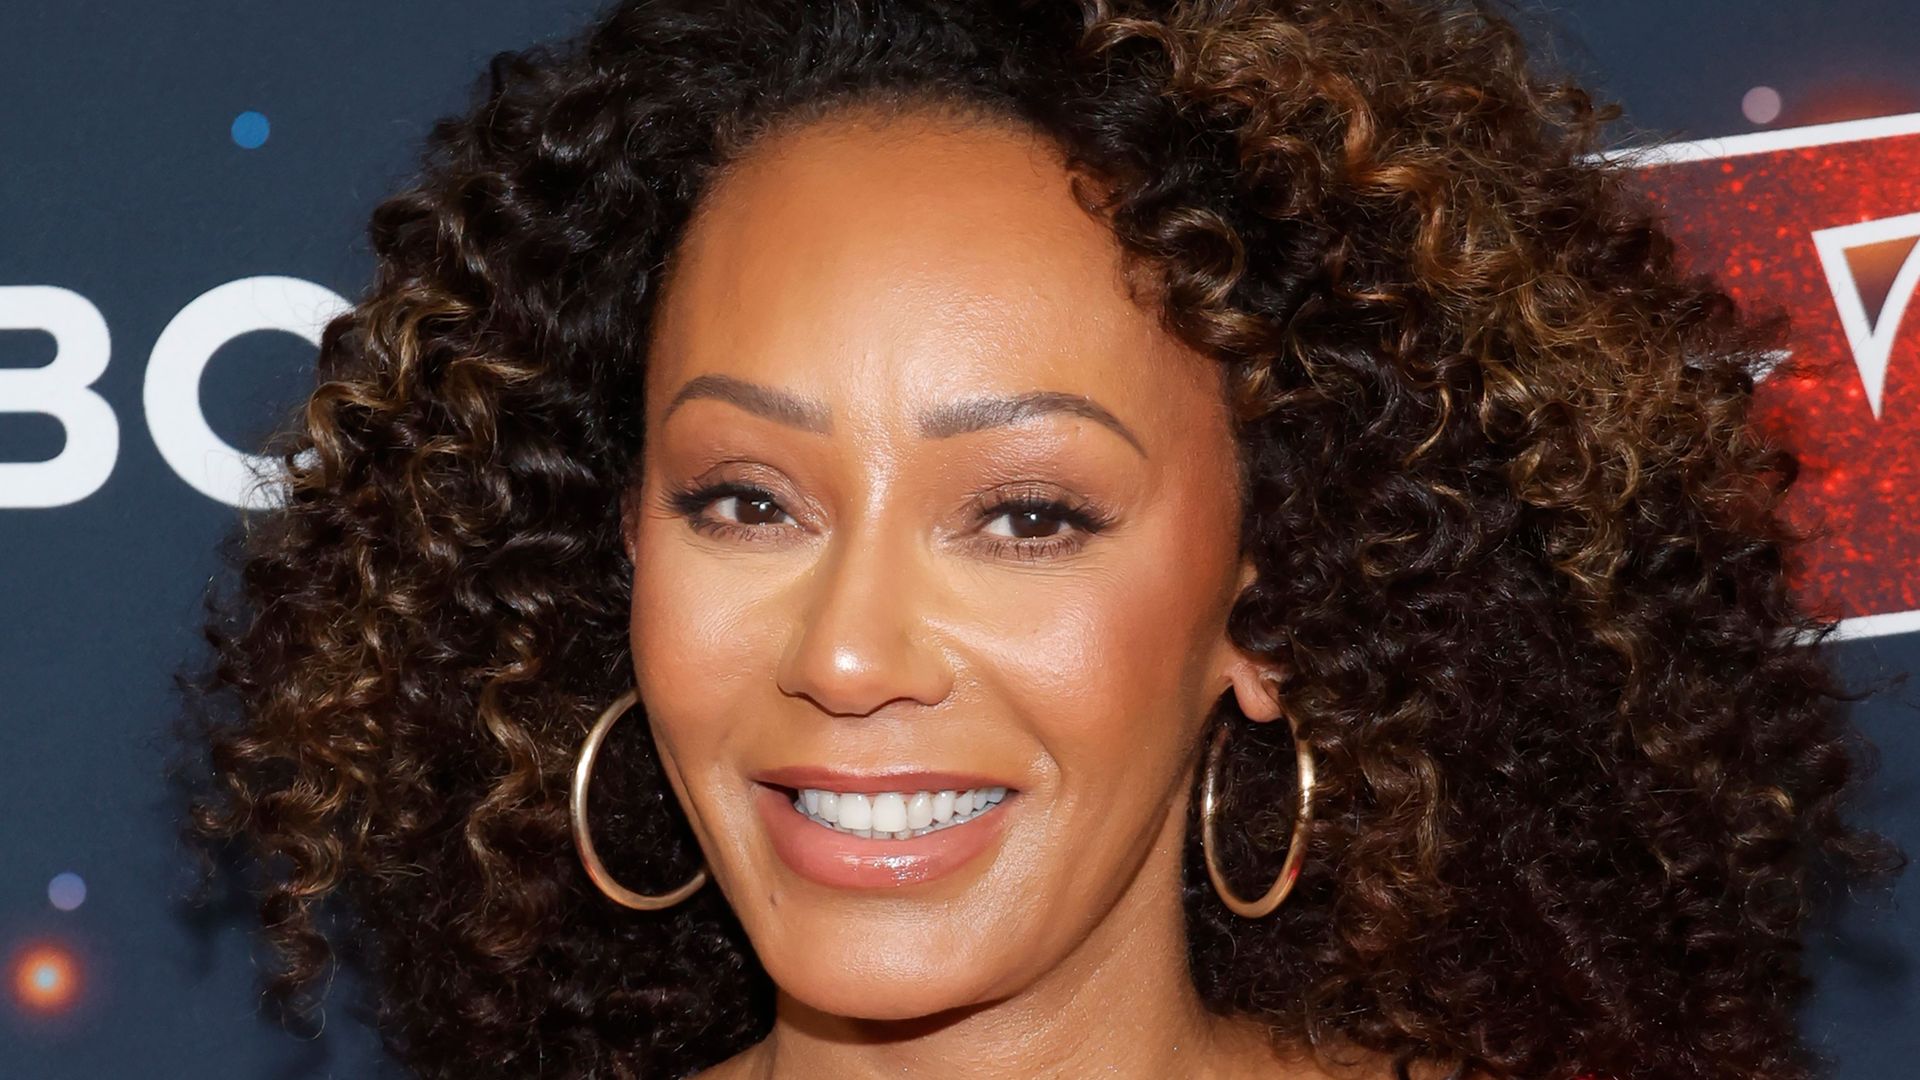 Mel B leaves fans speechless as she rocks her most daring look to date ...